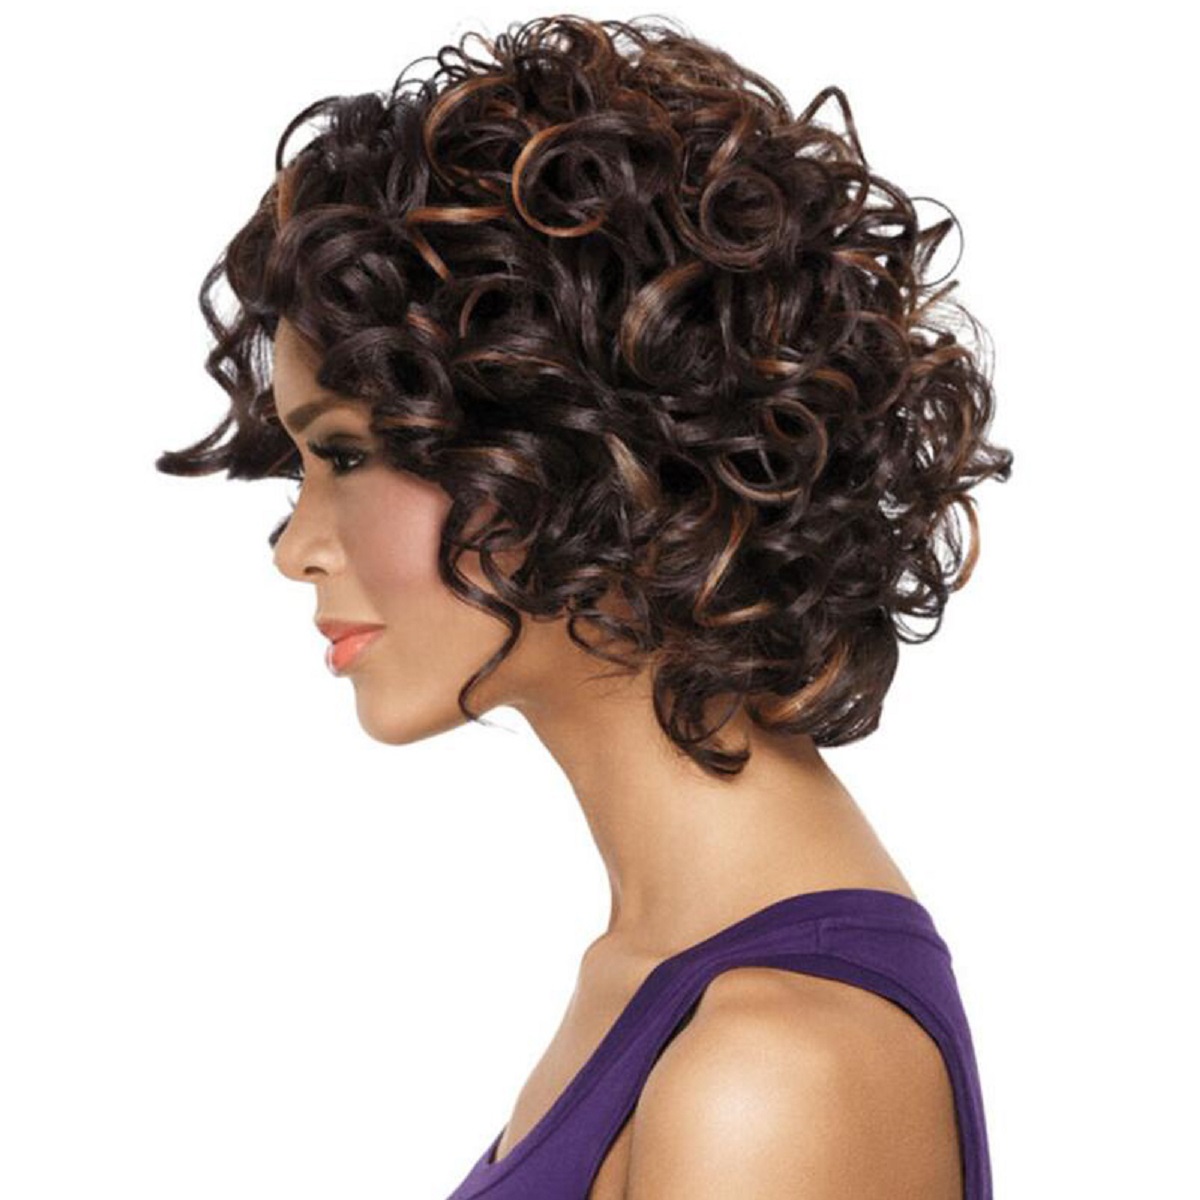 US Women Short Black Curly Wigs For Women African Lady